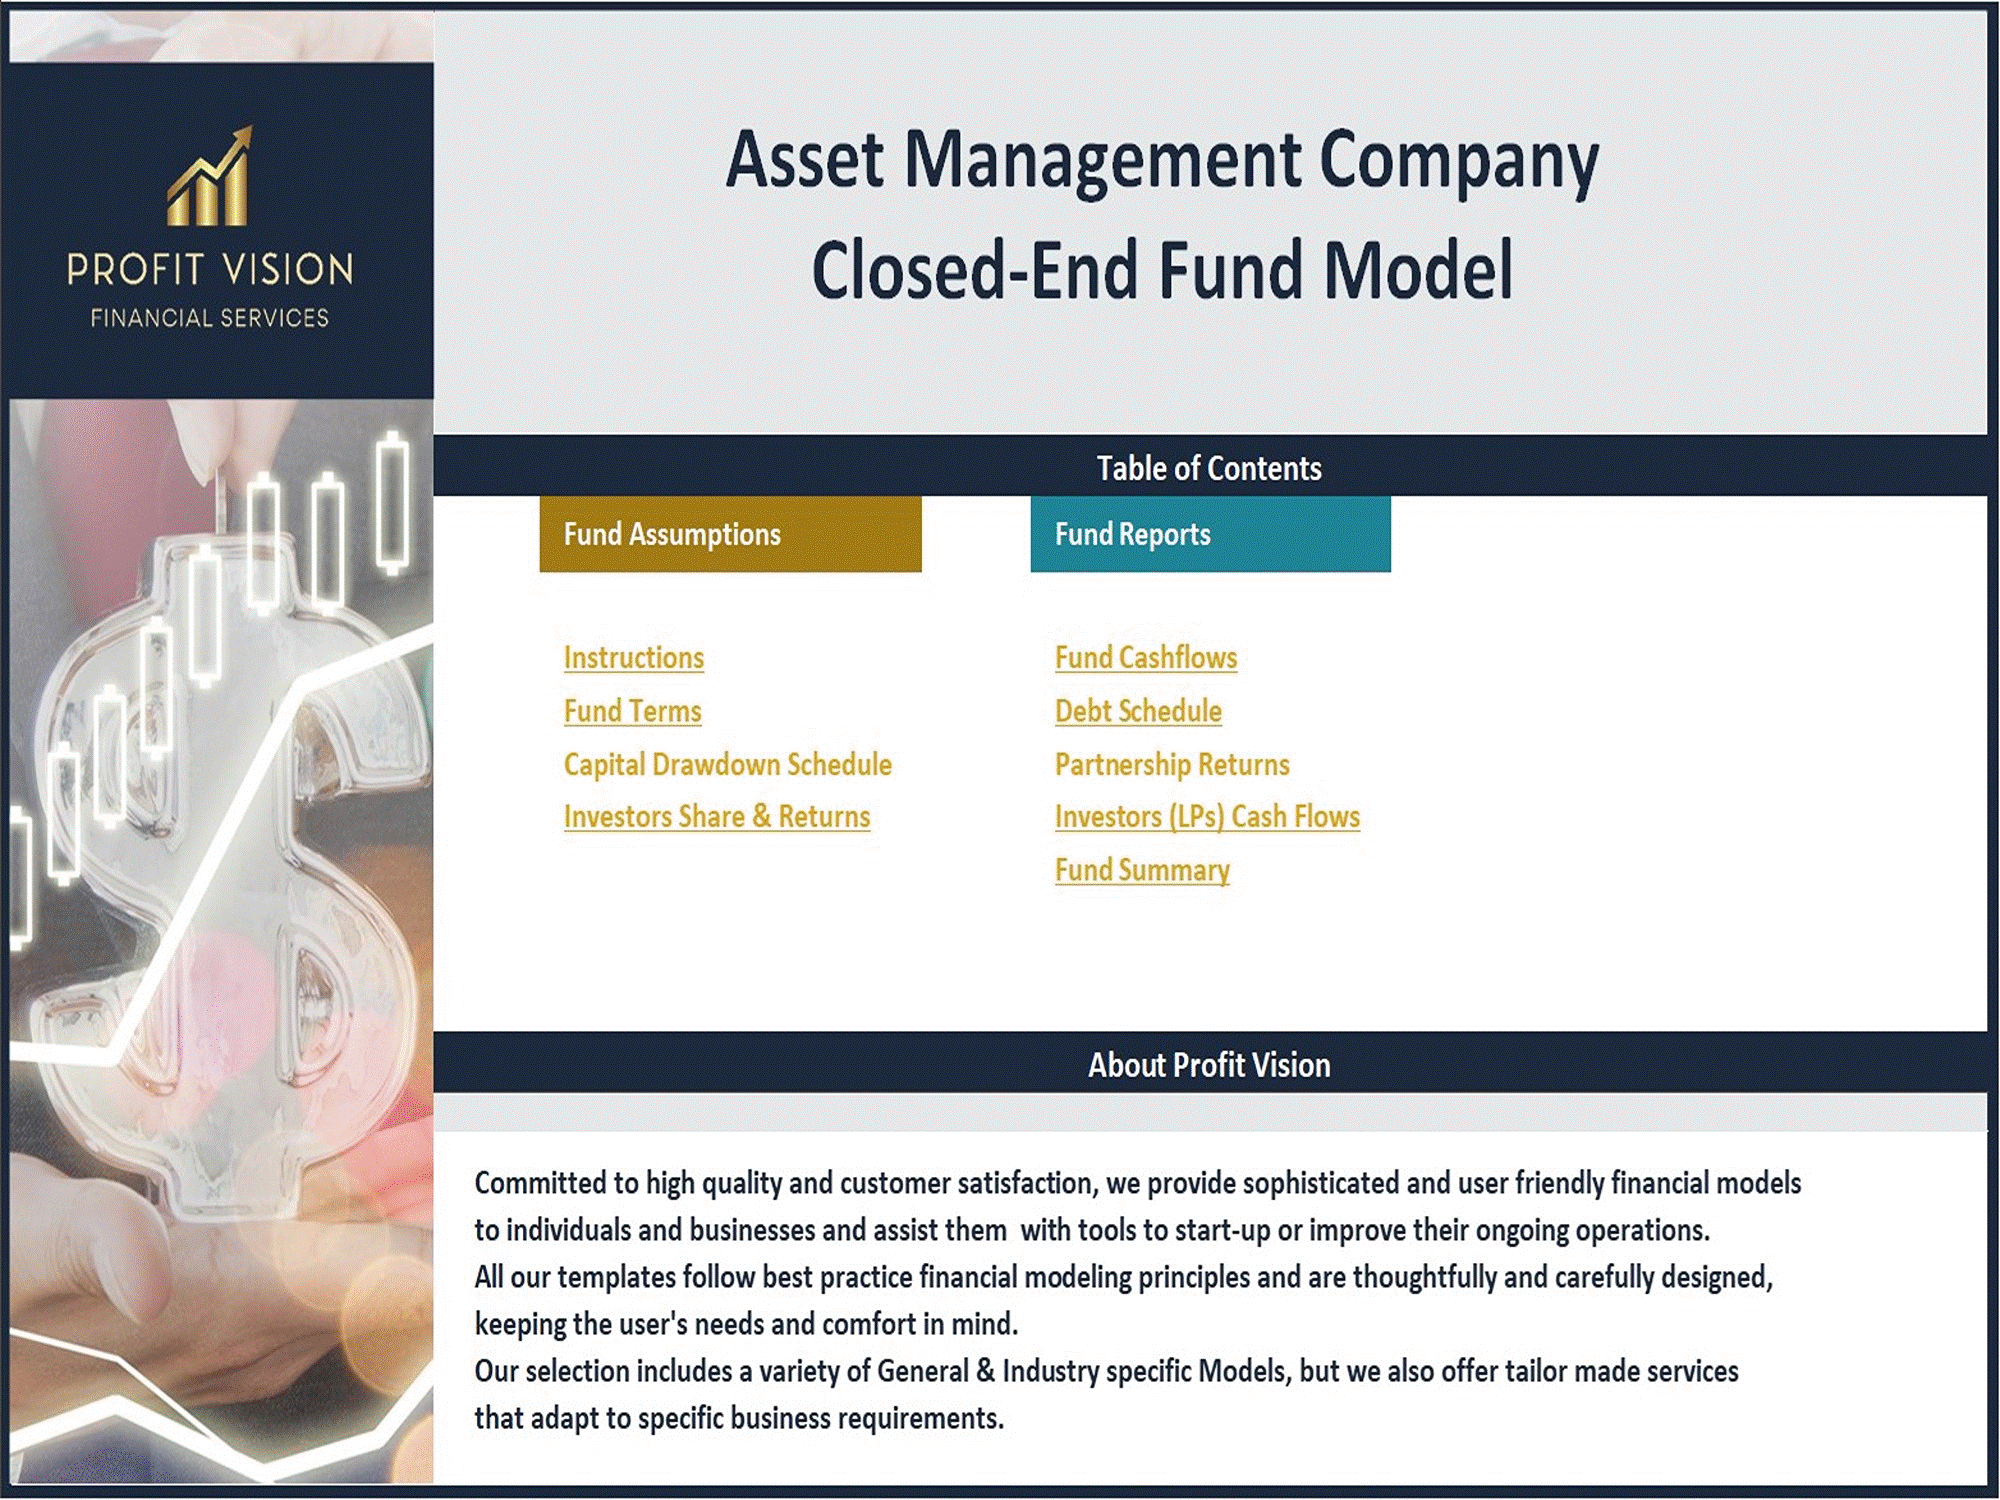 Asset Management Company - Closed End Fund Model (Excel template (XLSX)) Preview Image